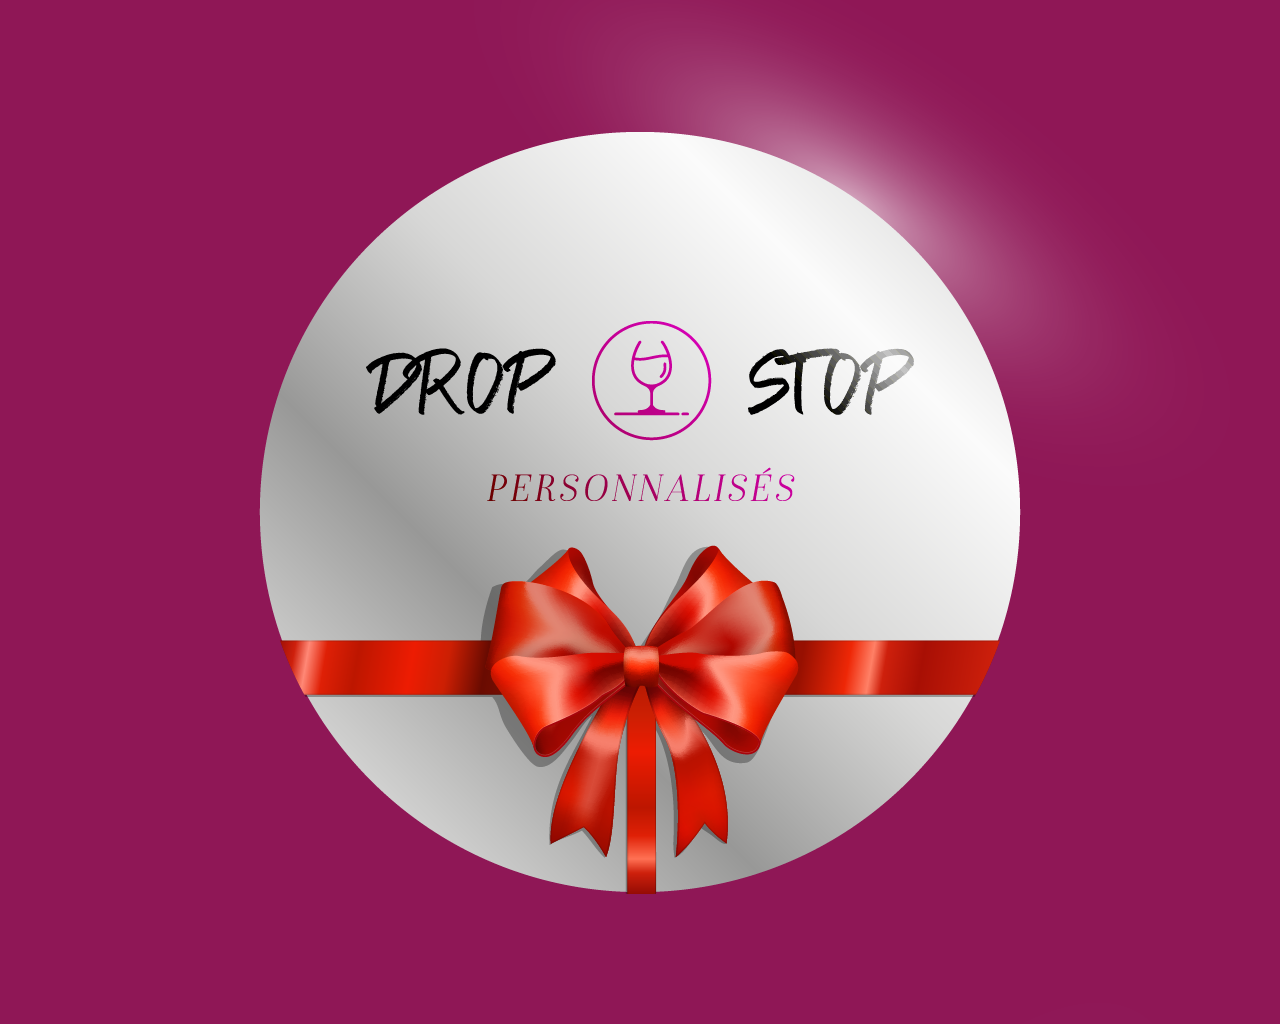 The personalized drop stop: an original and useful gift